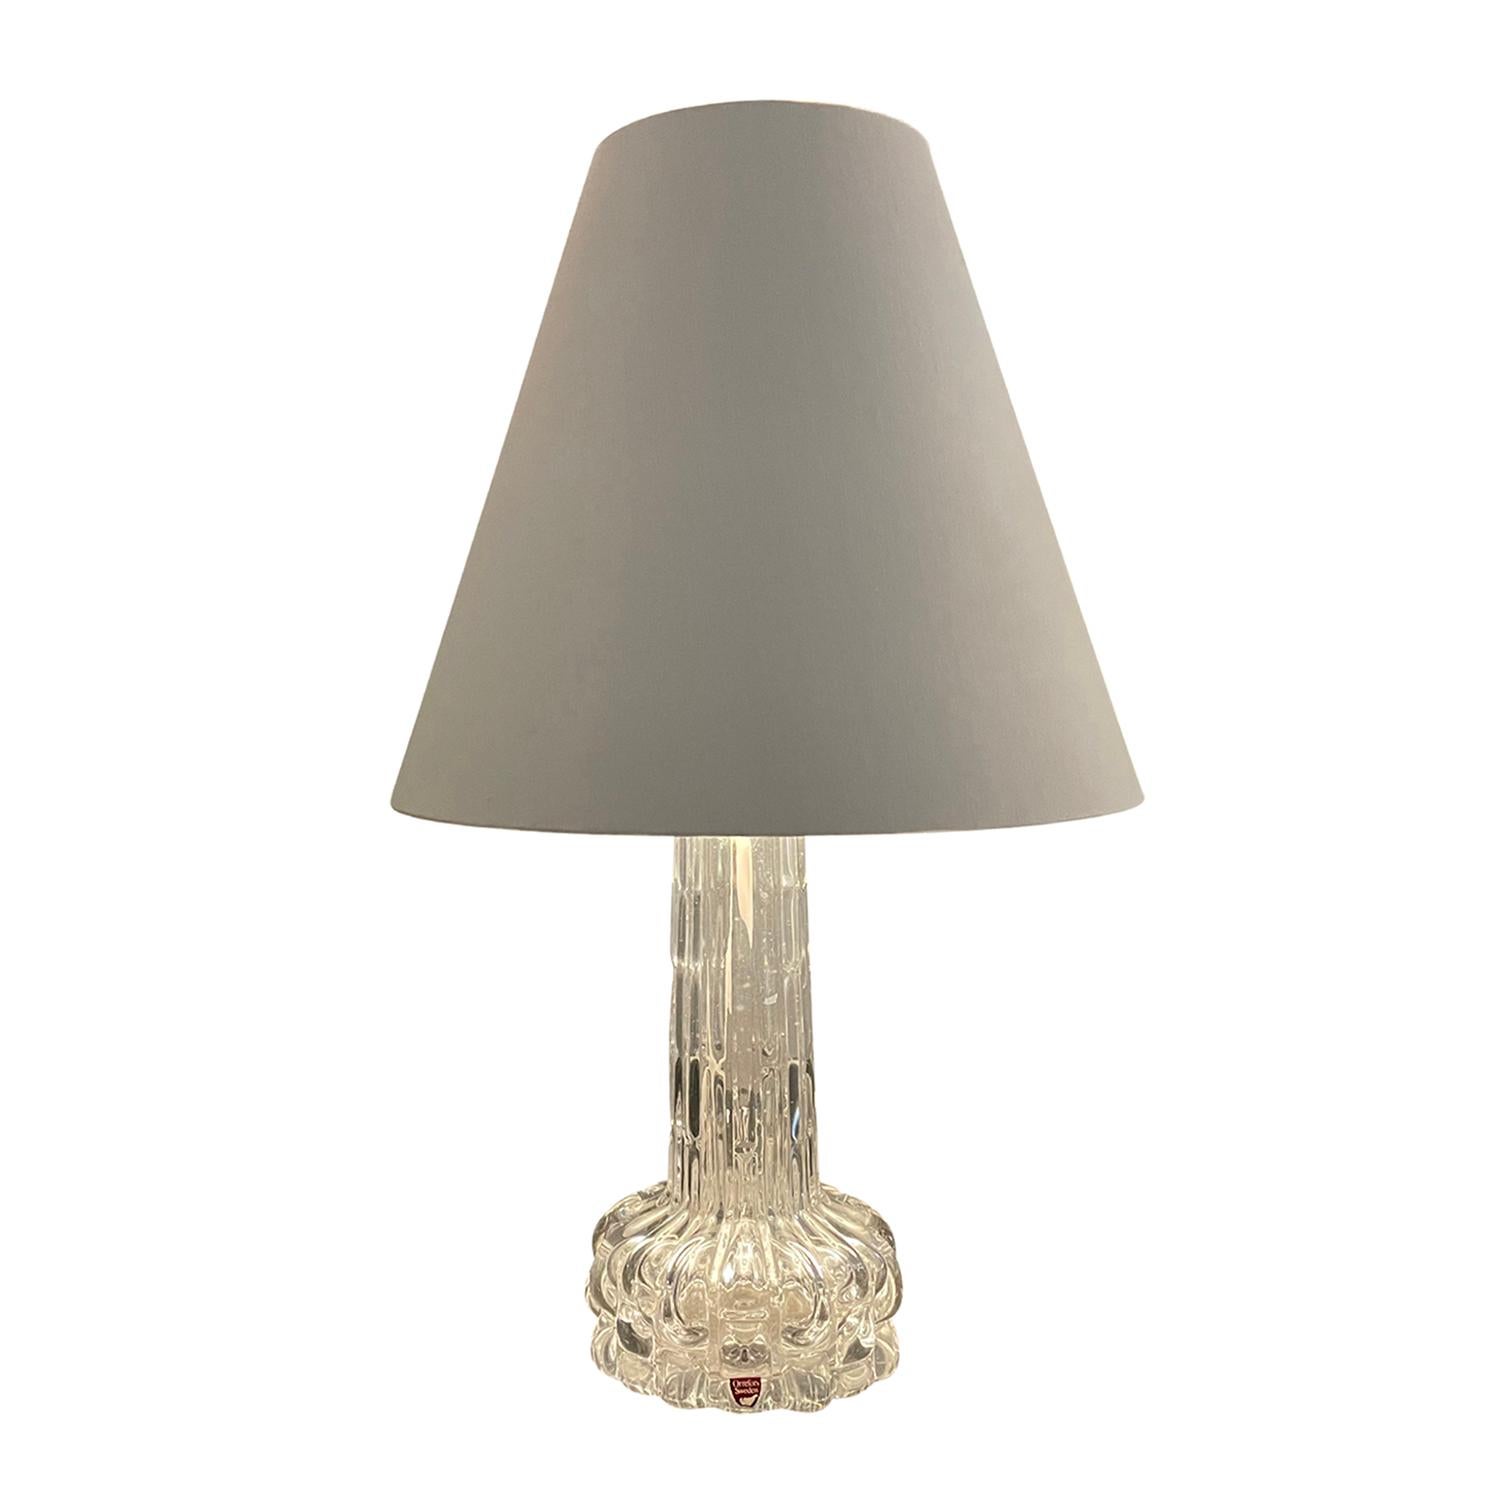 20th Century, Swedish, Orrefors Table Lamp, Scandinavian Light by Carl Fagerlund In Good Condition For Sale In West Palm Beach, FL